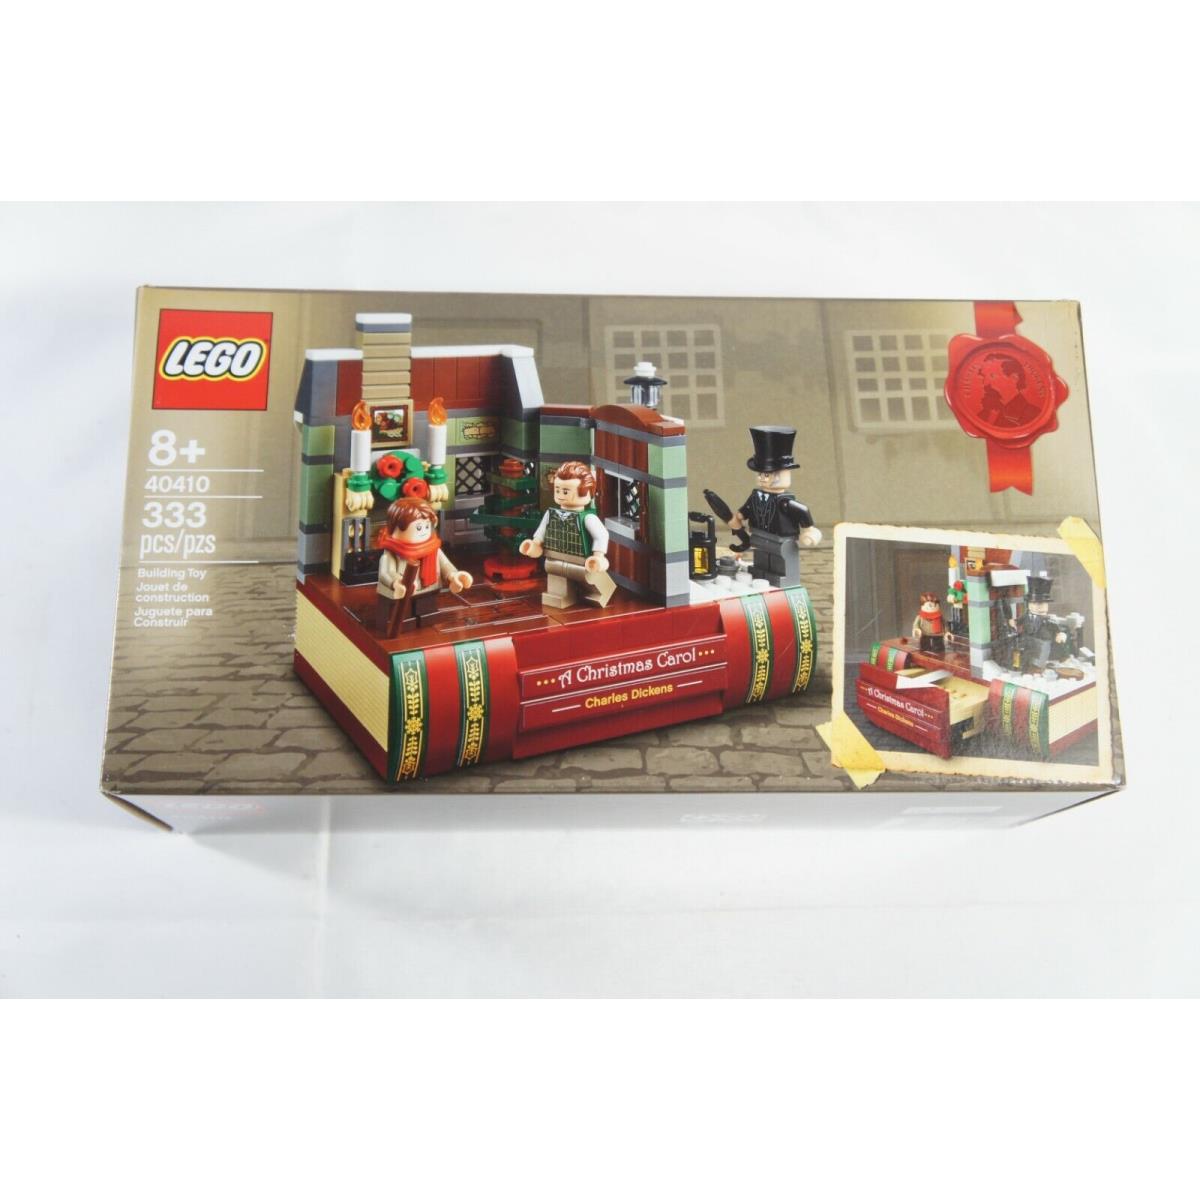 Lego Charles Dickens Tribute 40410 A Christmas Carol 2020 Exclusive Promo